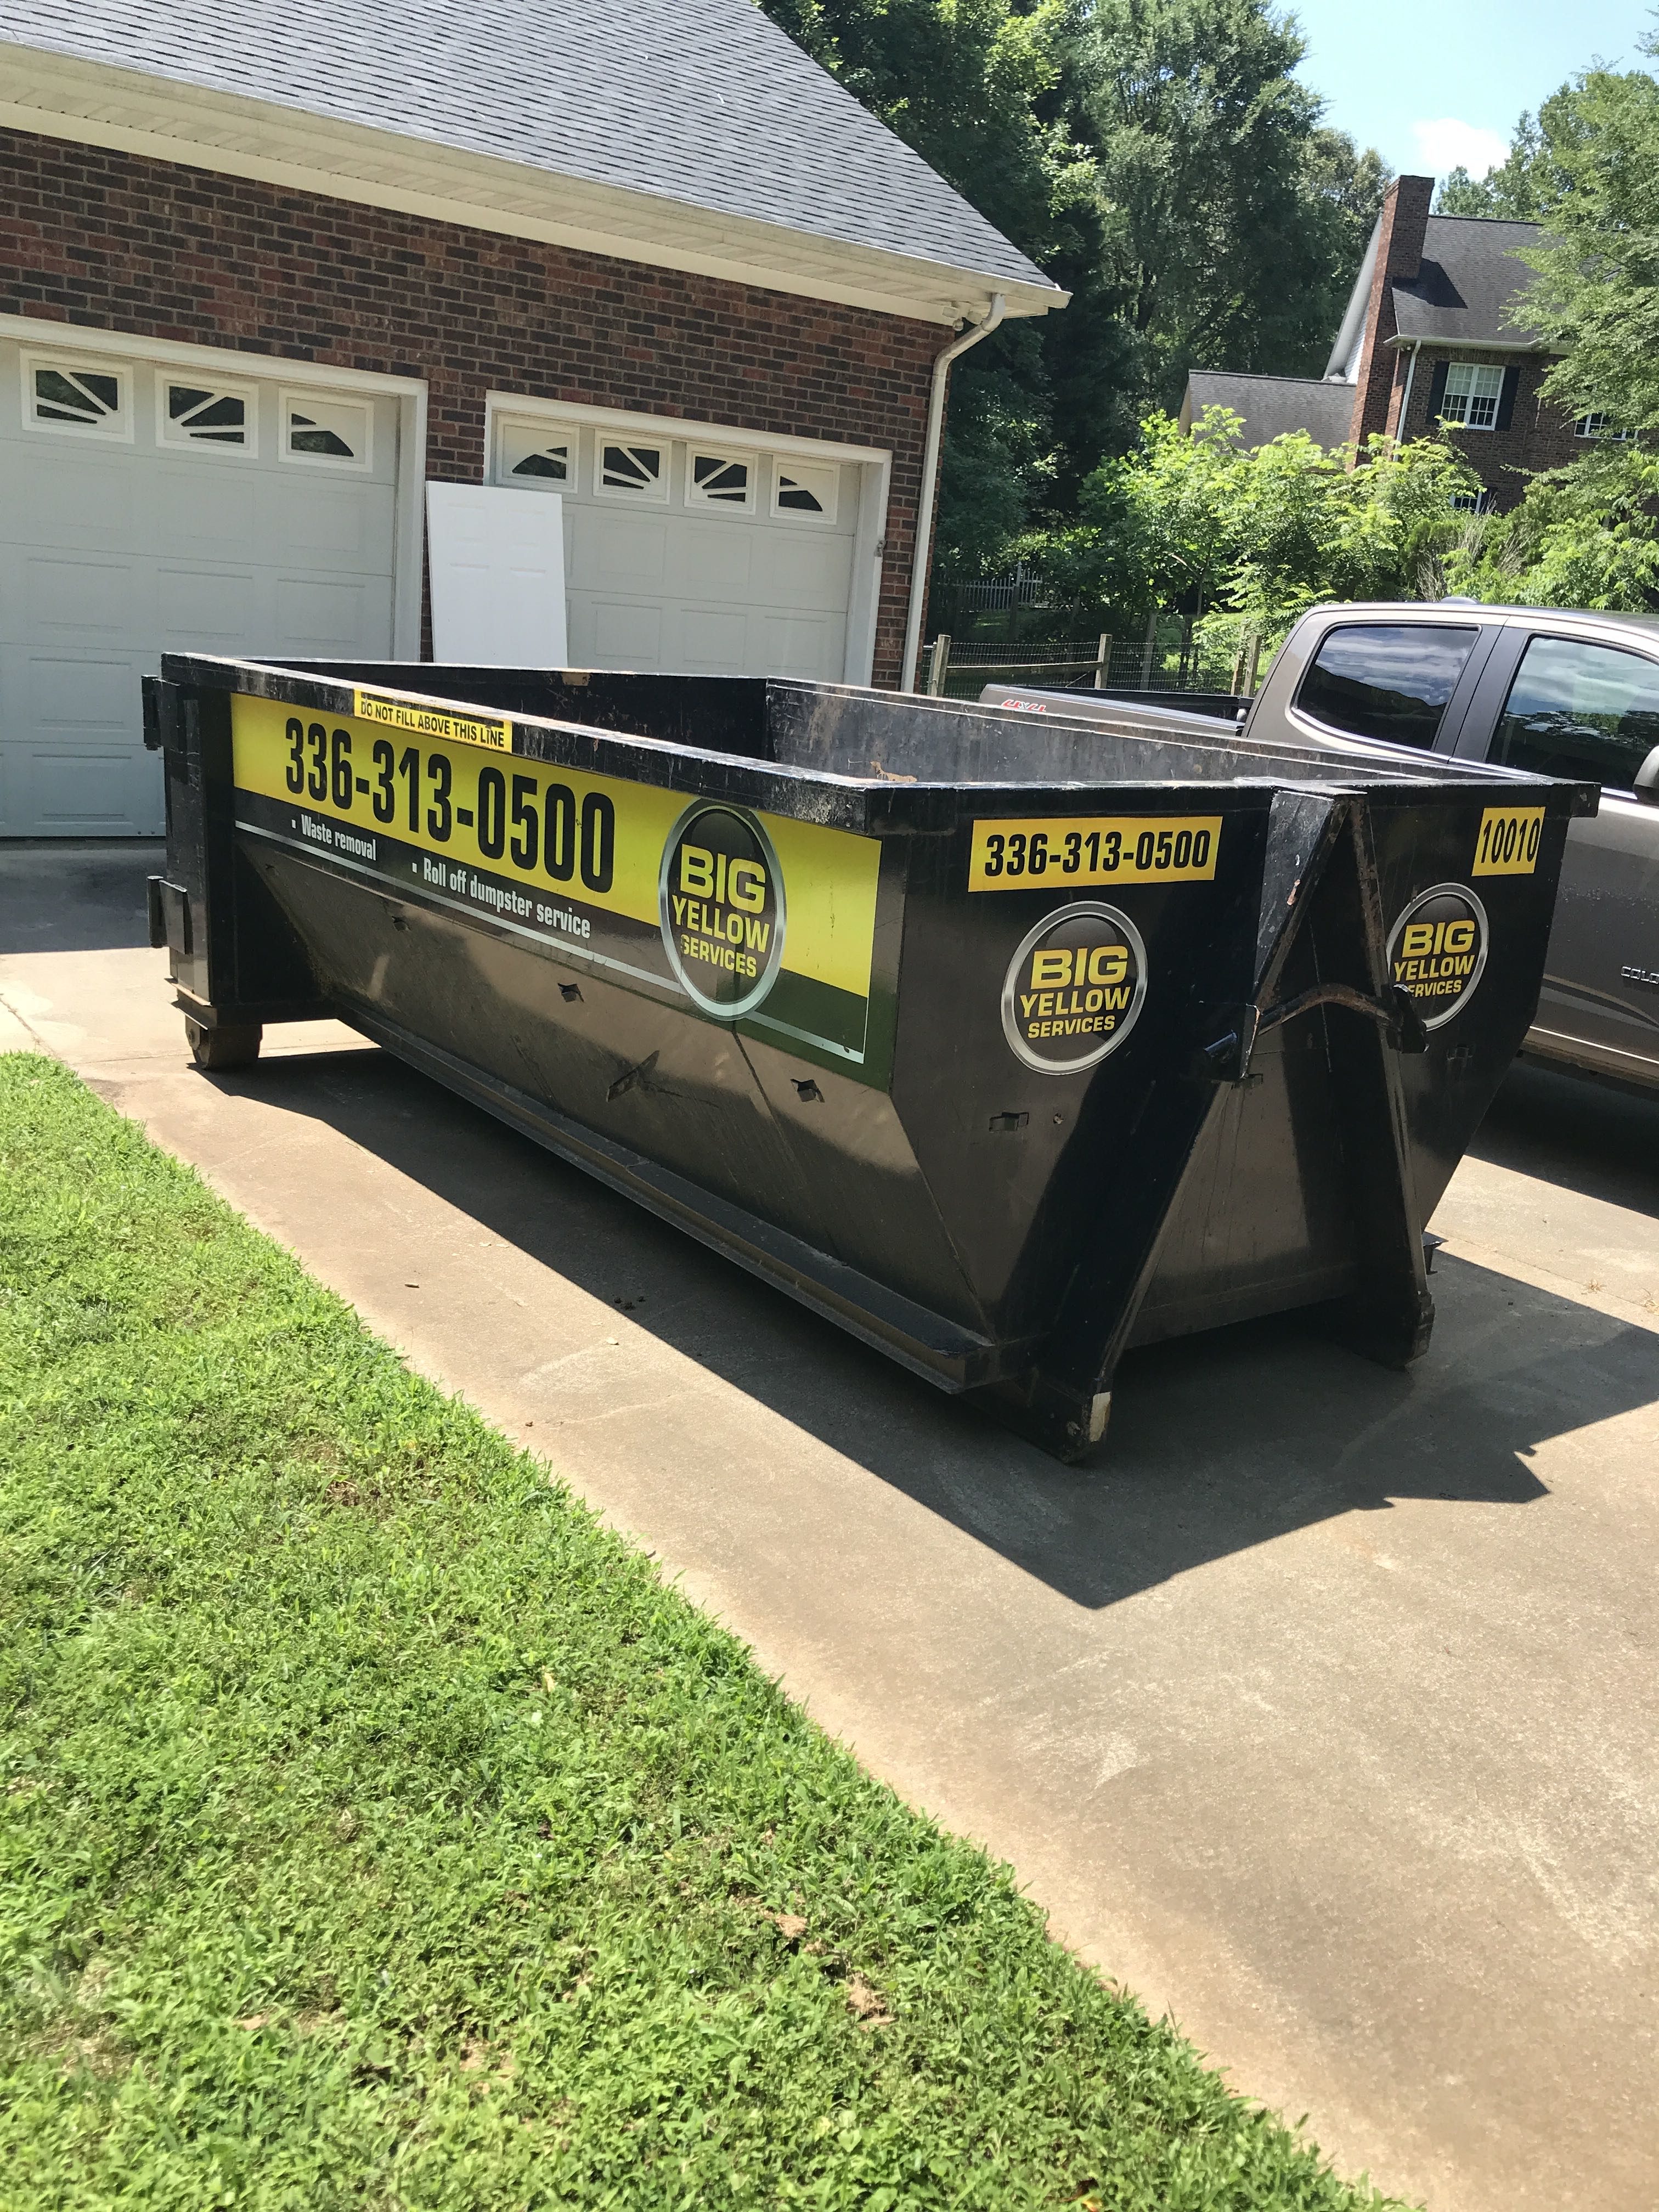 4200 Vista Knoll Drive Burlington, NC 27215 (2) Privacy Policy | Roll-Off Dumpster and Portable Toilet Rentals | Big Yellow Services, LLC